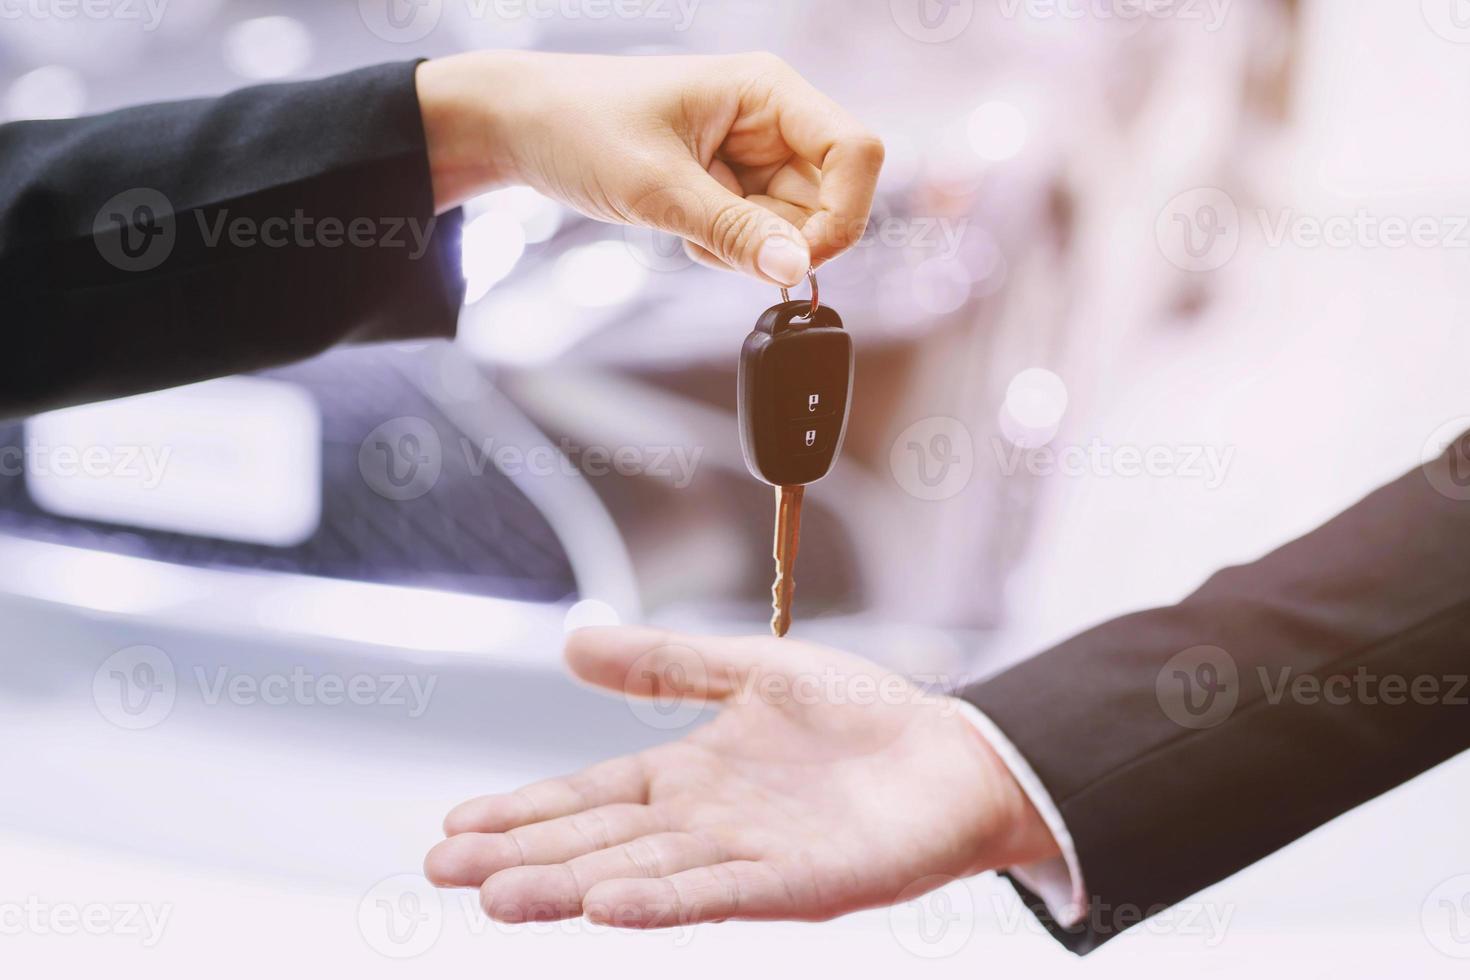 The car salesman is handing over the keys to the buyer after the lease has been agreed. photo